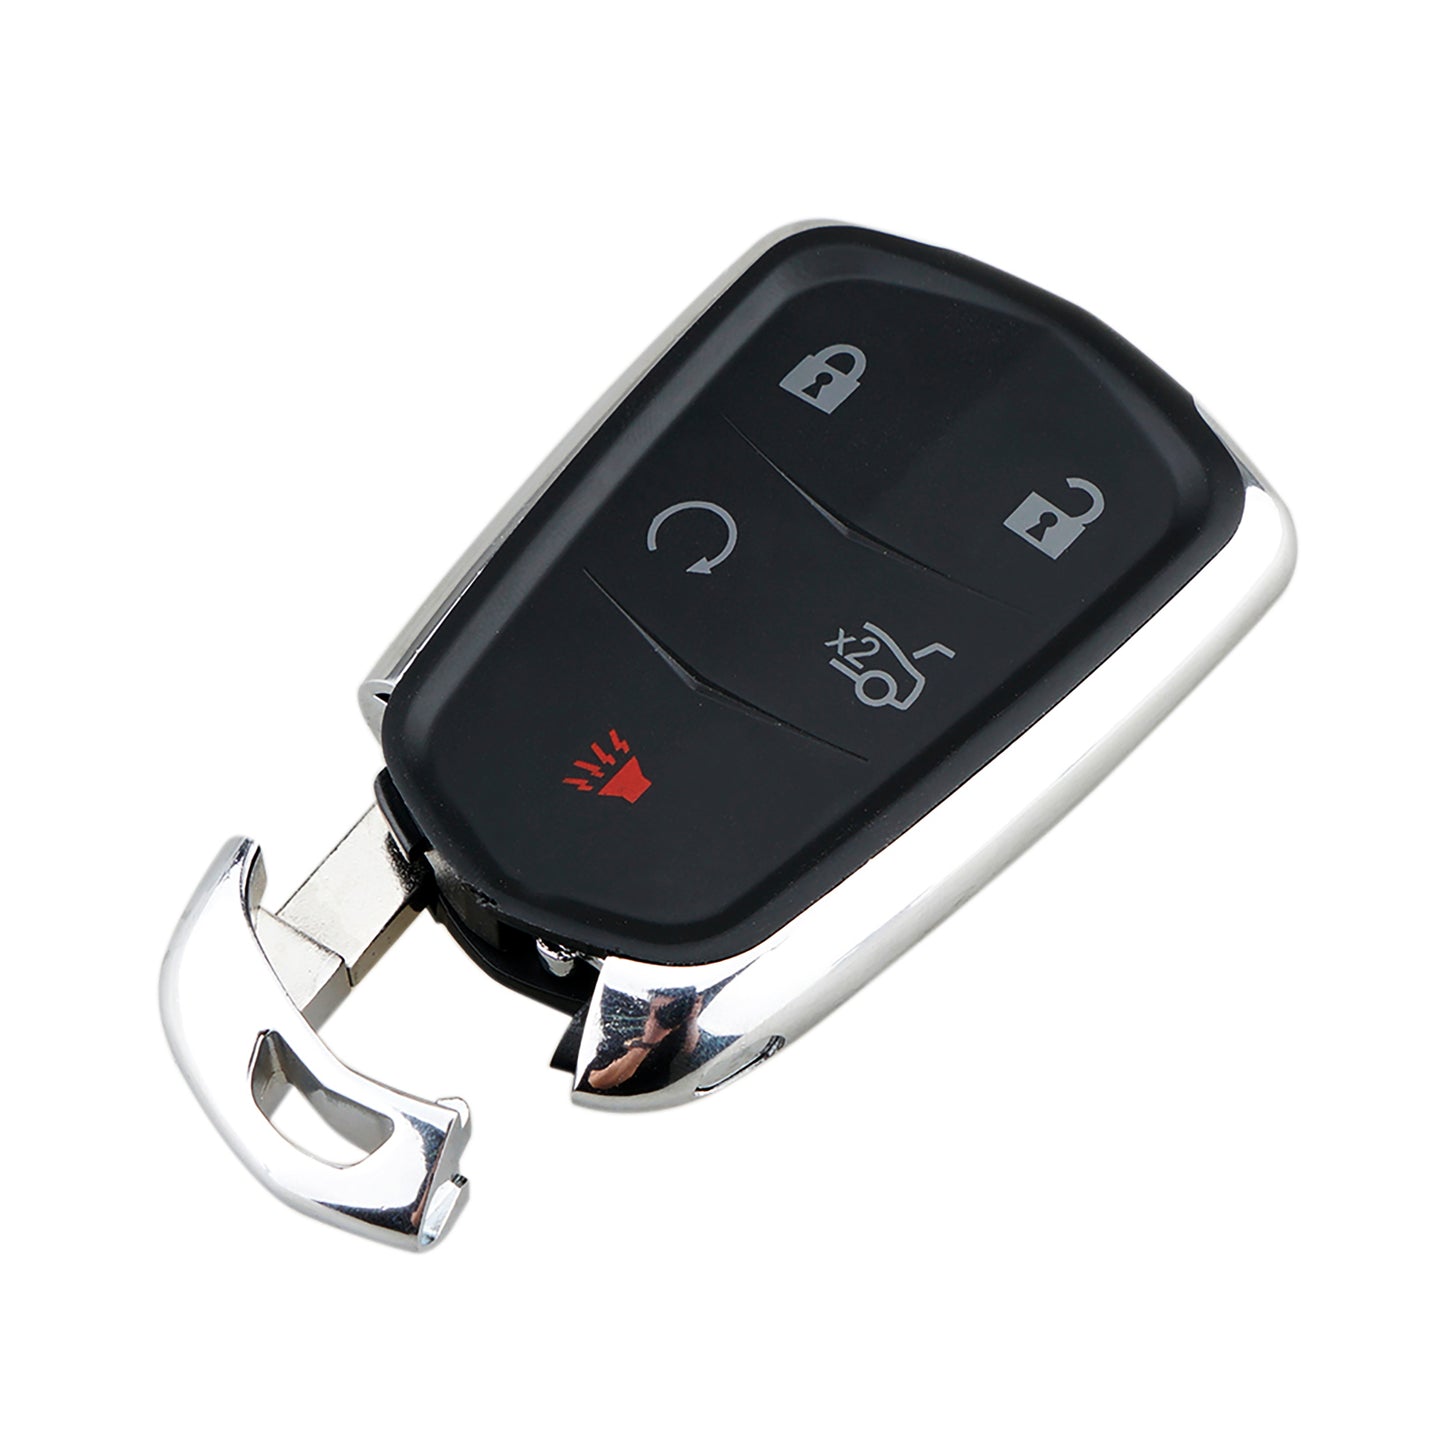 5 Buttons 433MHz Keyless Entry Fob Remote Car Key For2015 -2020 Cadillac ATS-V ATS CT6  CT6 Plug-In  CTS/CTS-V XTS FCC ID: NBG009768T SKU : J942